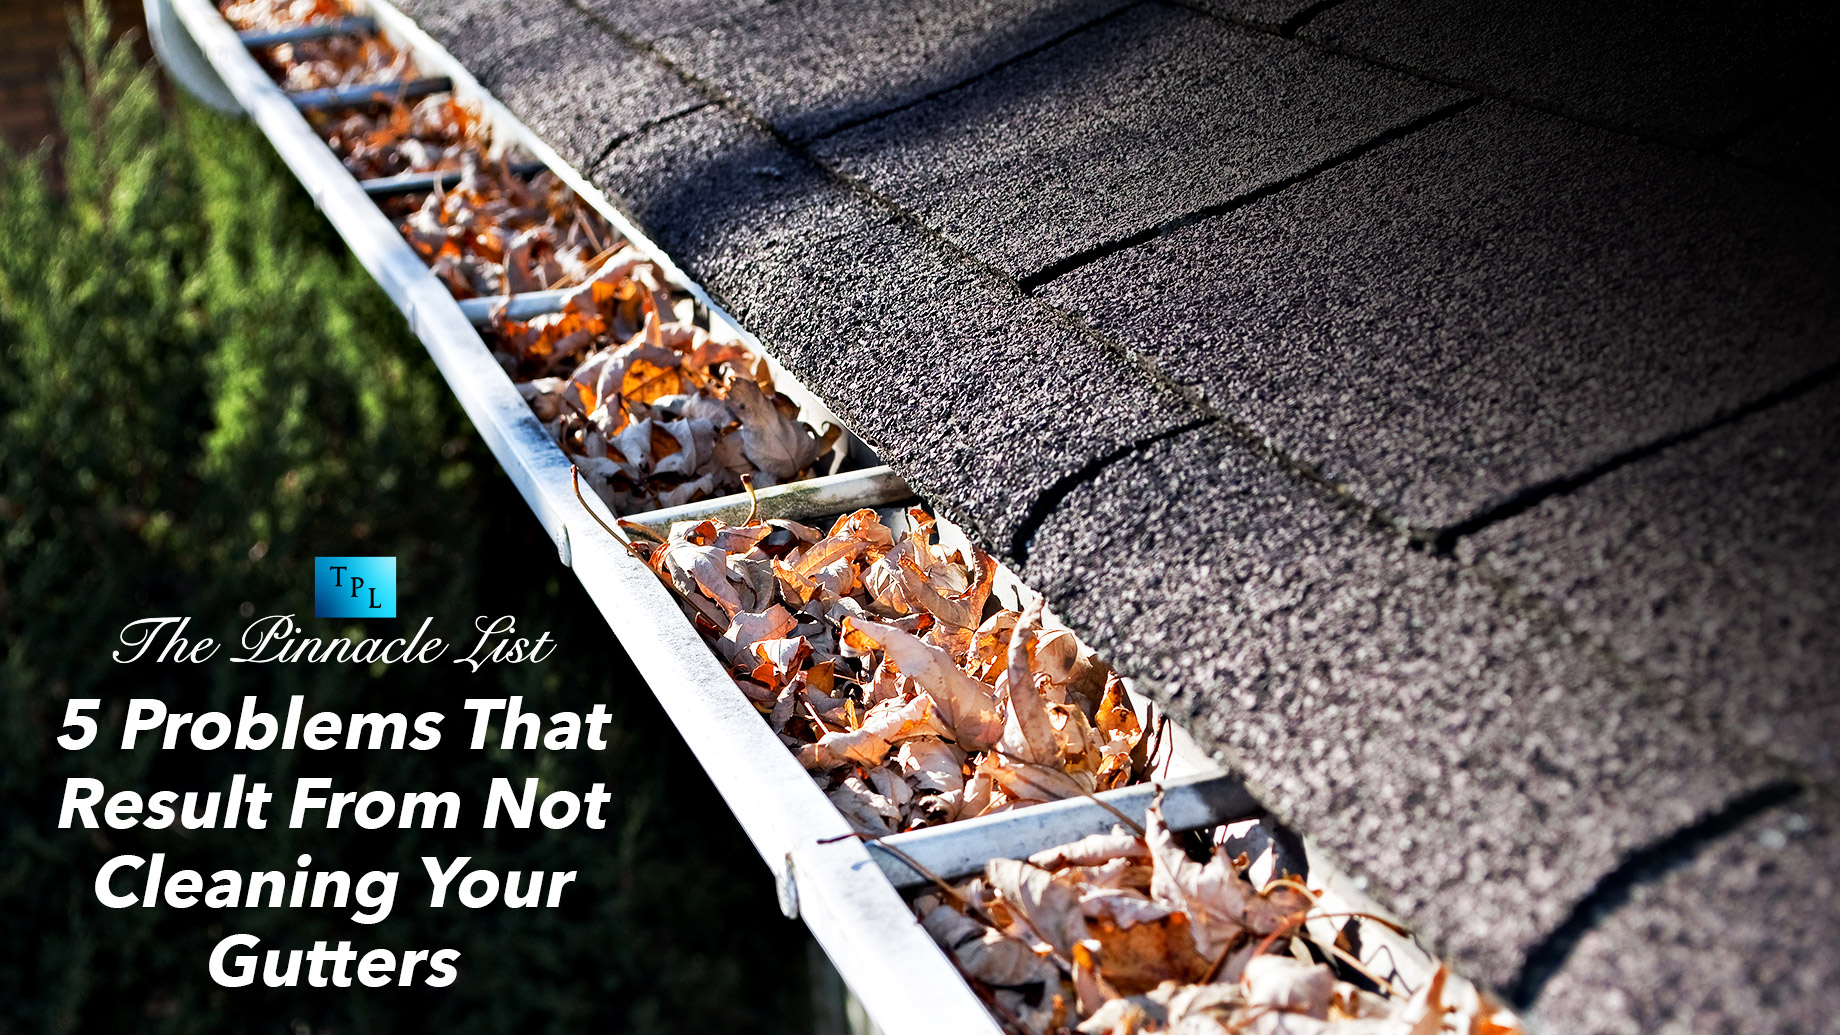 5 Problems That Result From Not Cleaning Your Gutters